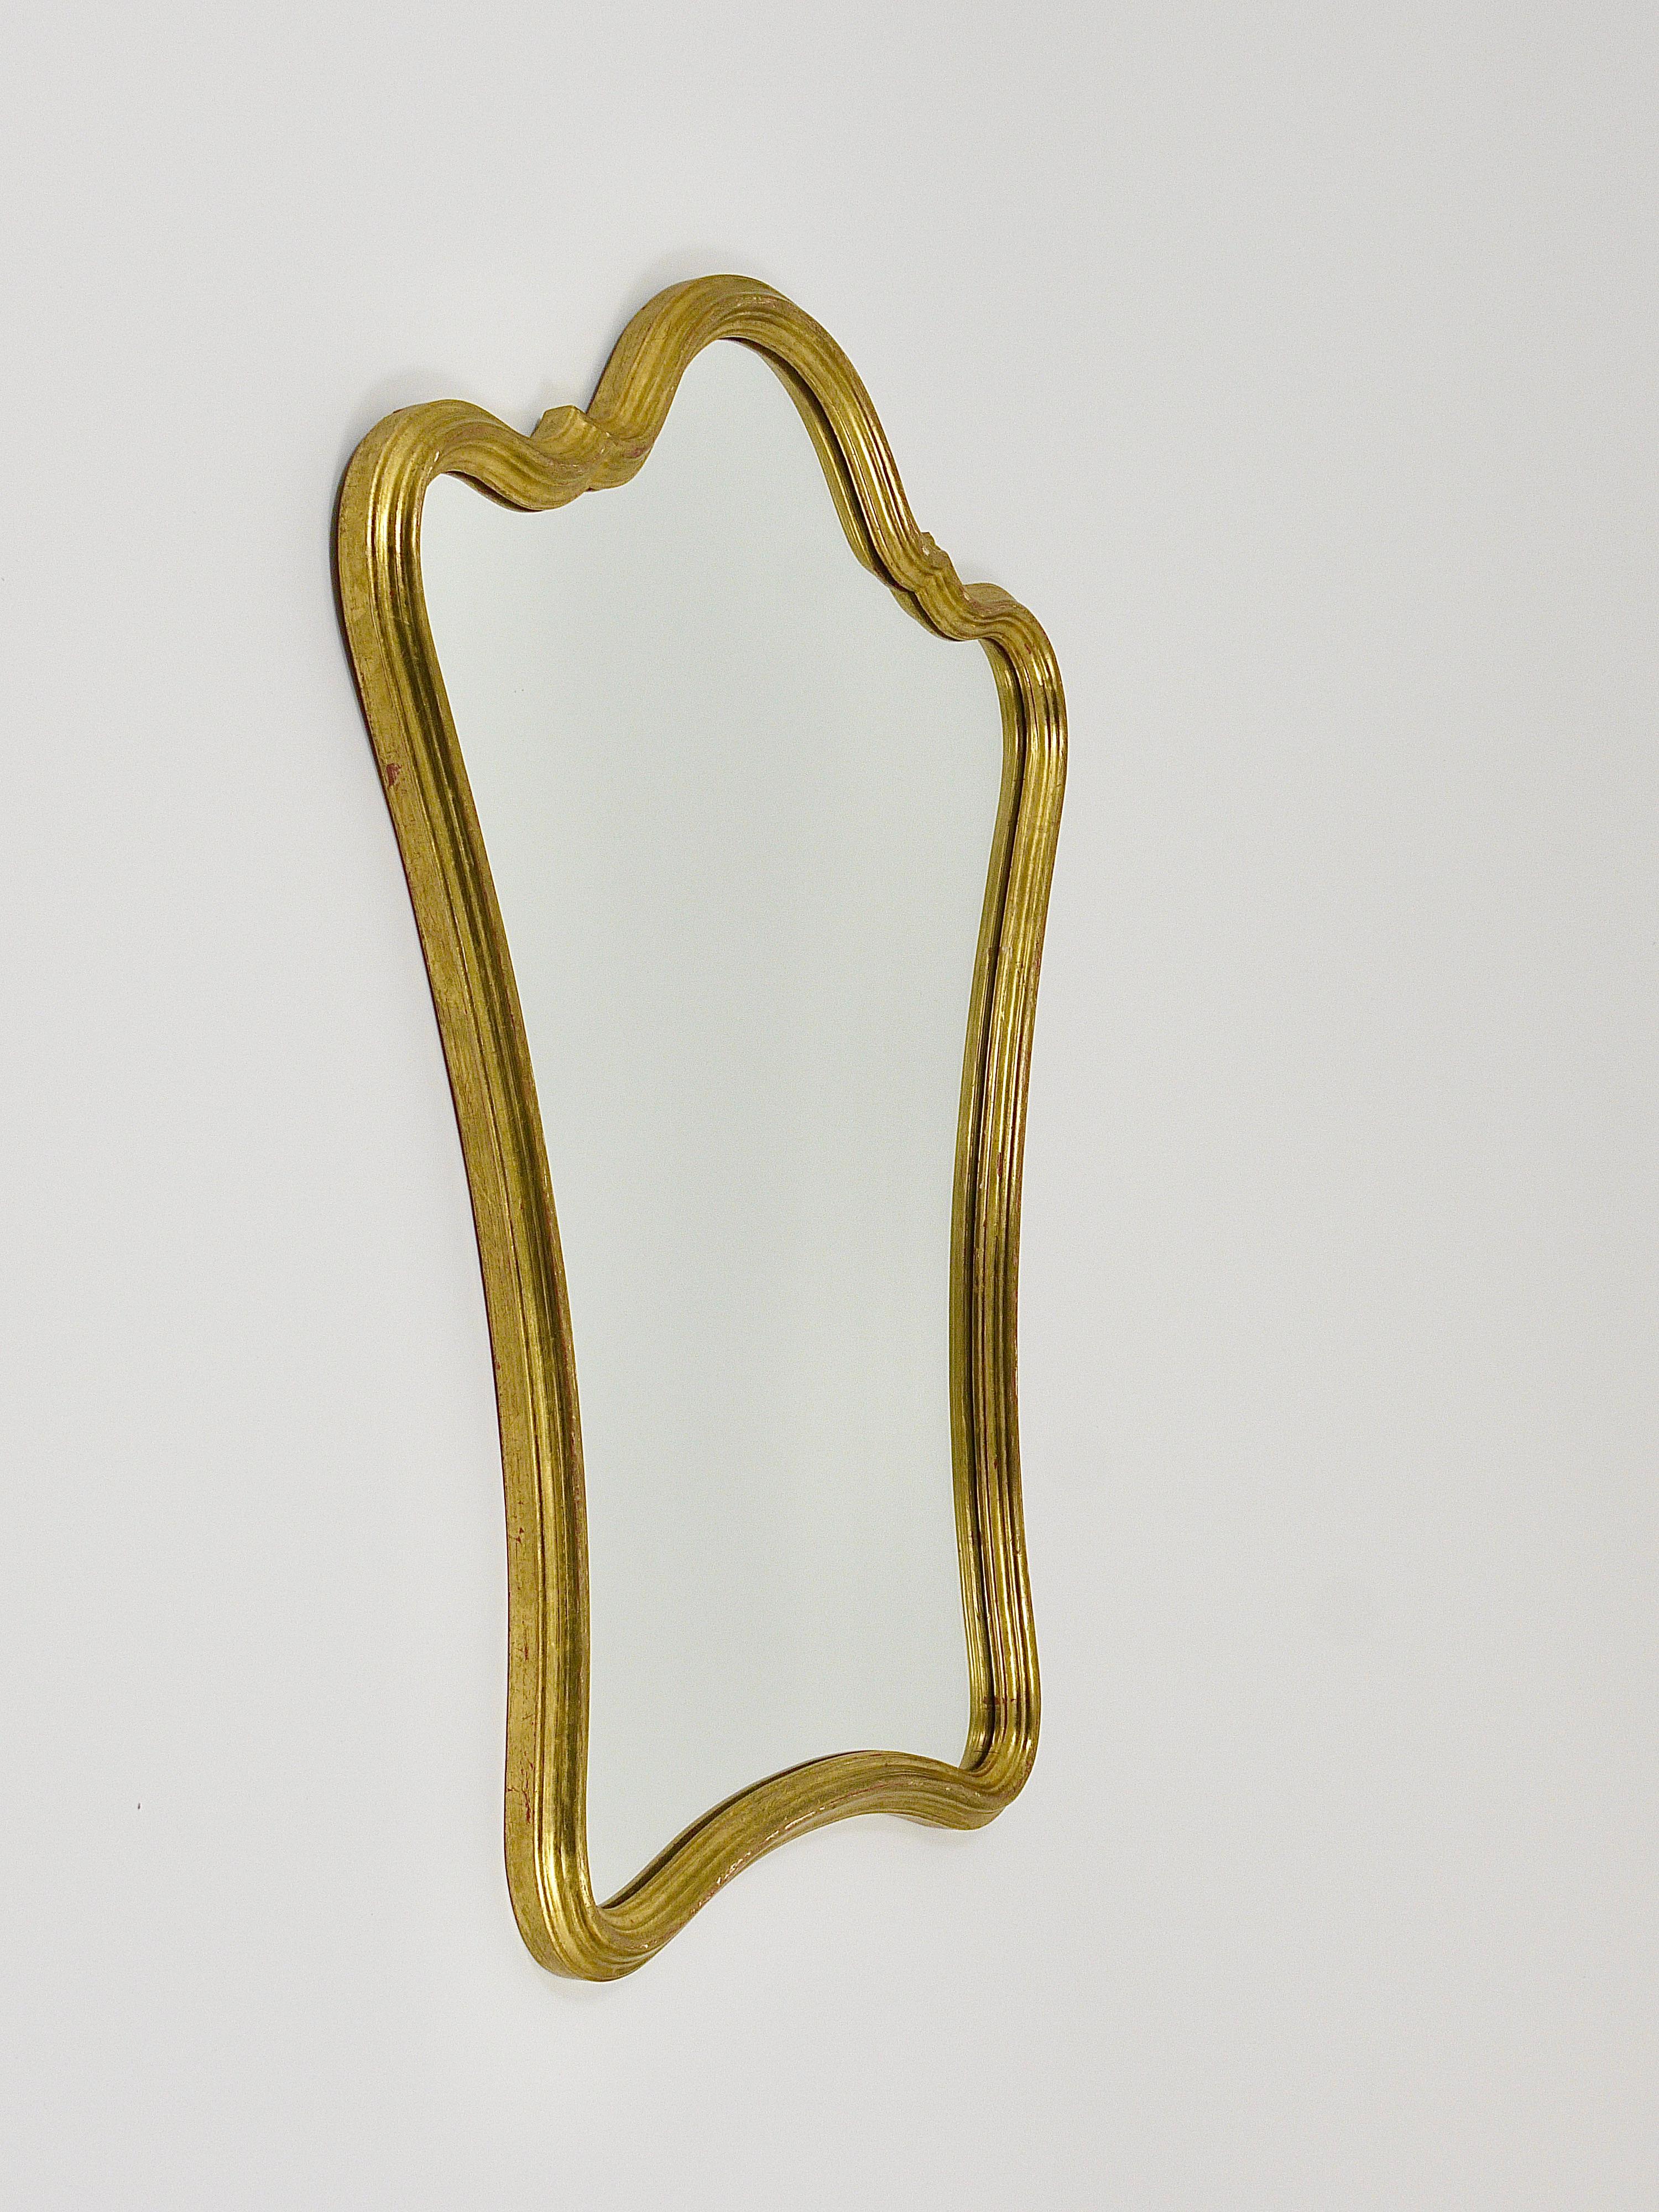 A charming Italian Mid-Century modernist wall mirror manufactured in the 1950s by Chelini C. N. Firenze in Florence, Tuscany, Italy. It is handmade from wood with a gold leaf finish. The frame features a beautifully curved shape and is in good